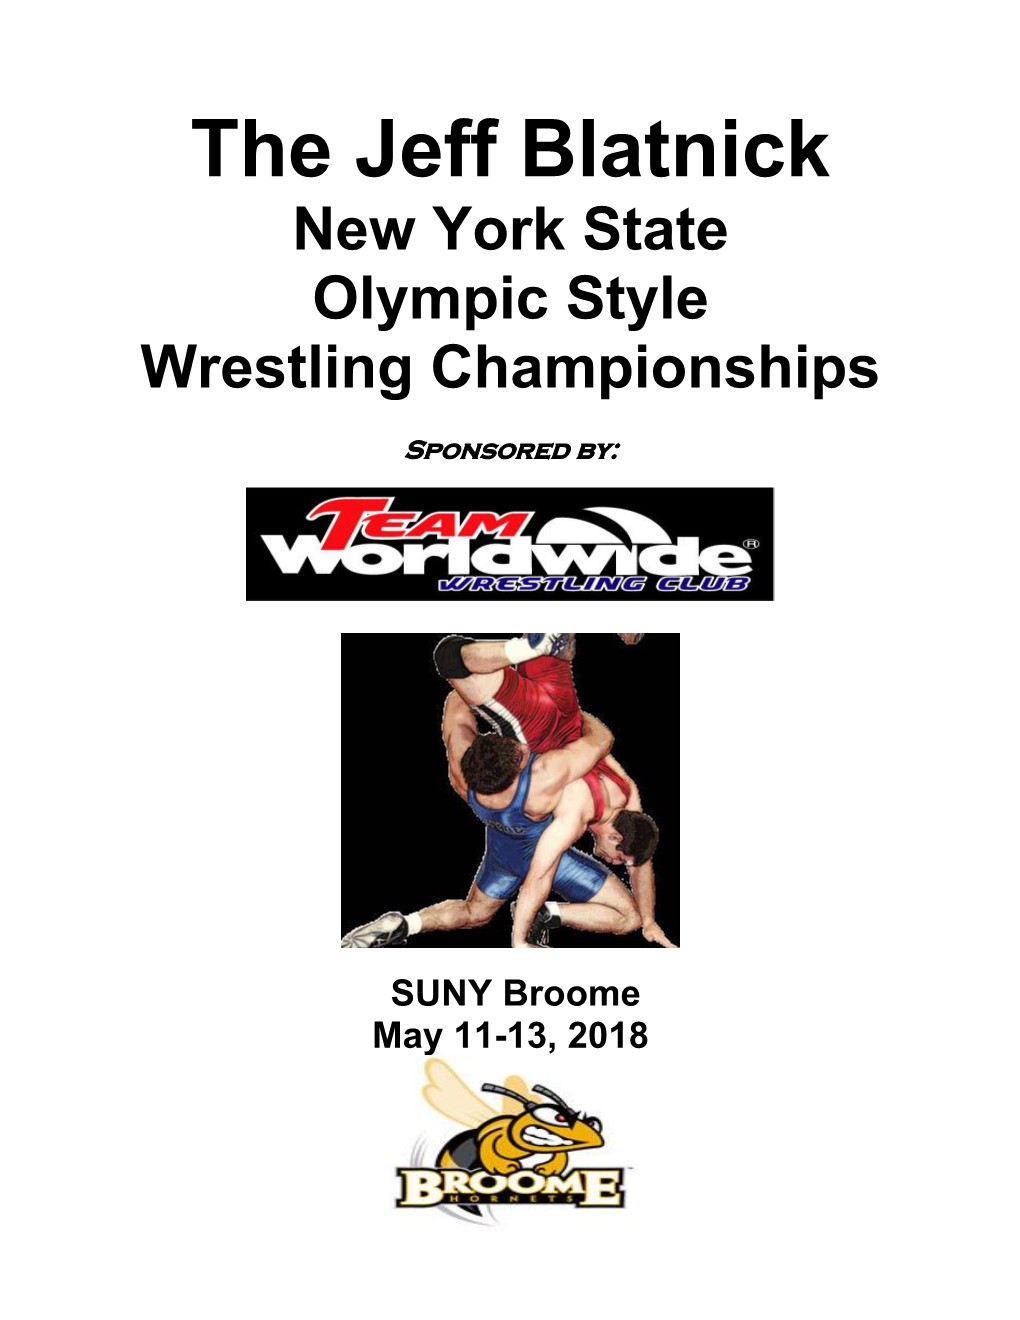 New York State Olympic Style Wrestling Championships